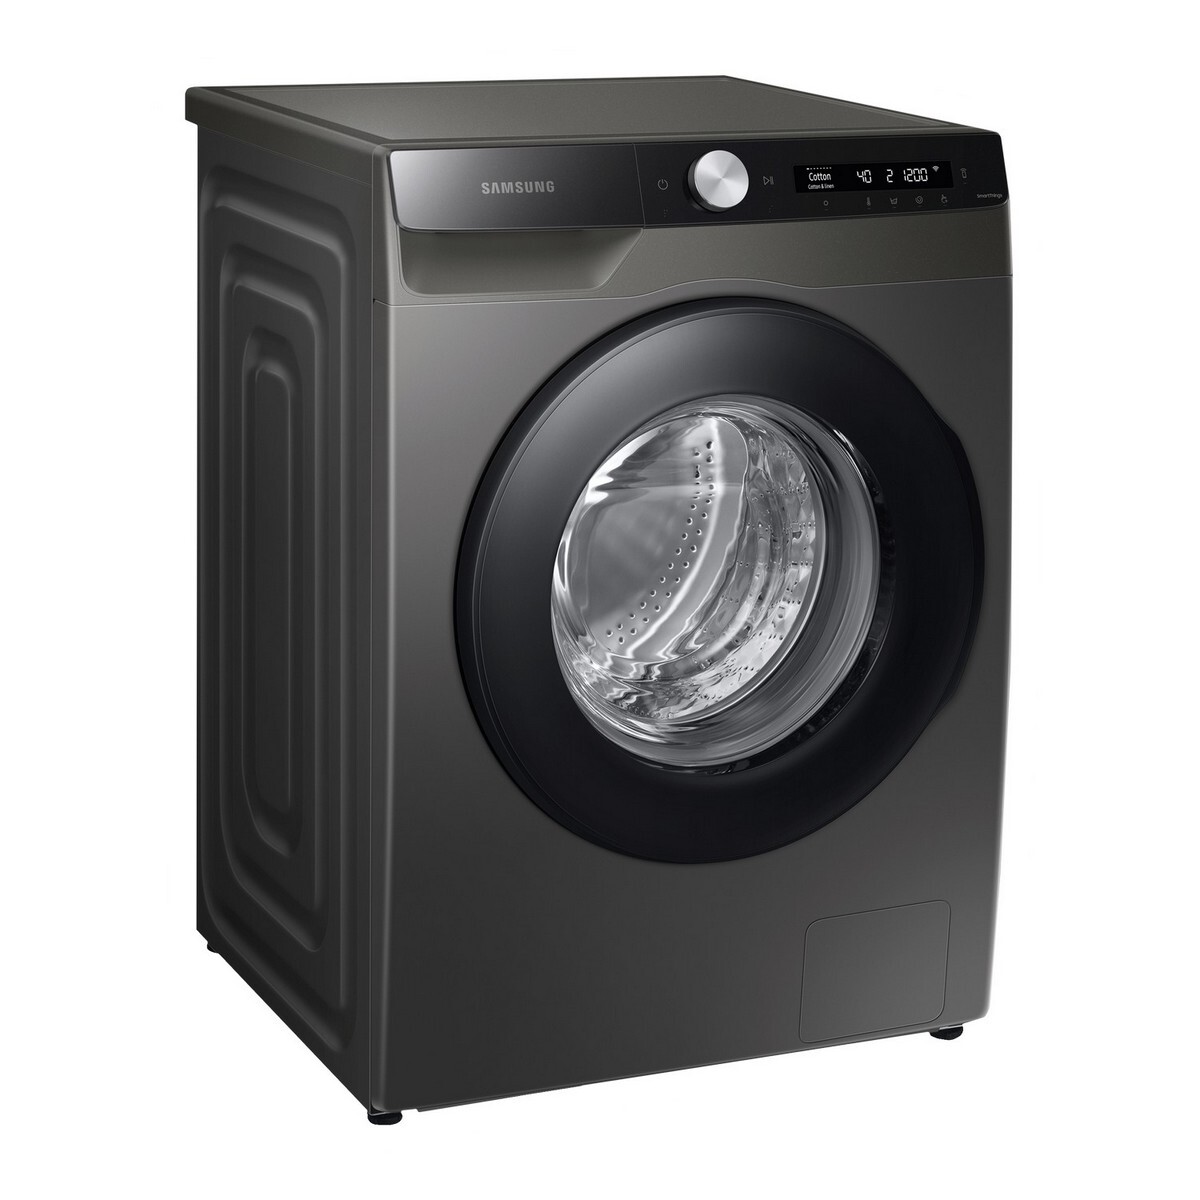 Samsung Ecobubble  Fully Automatic Front Load Washing Machine WW70T502DAX1 7Kg